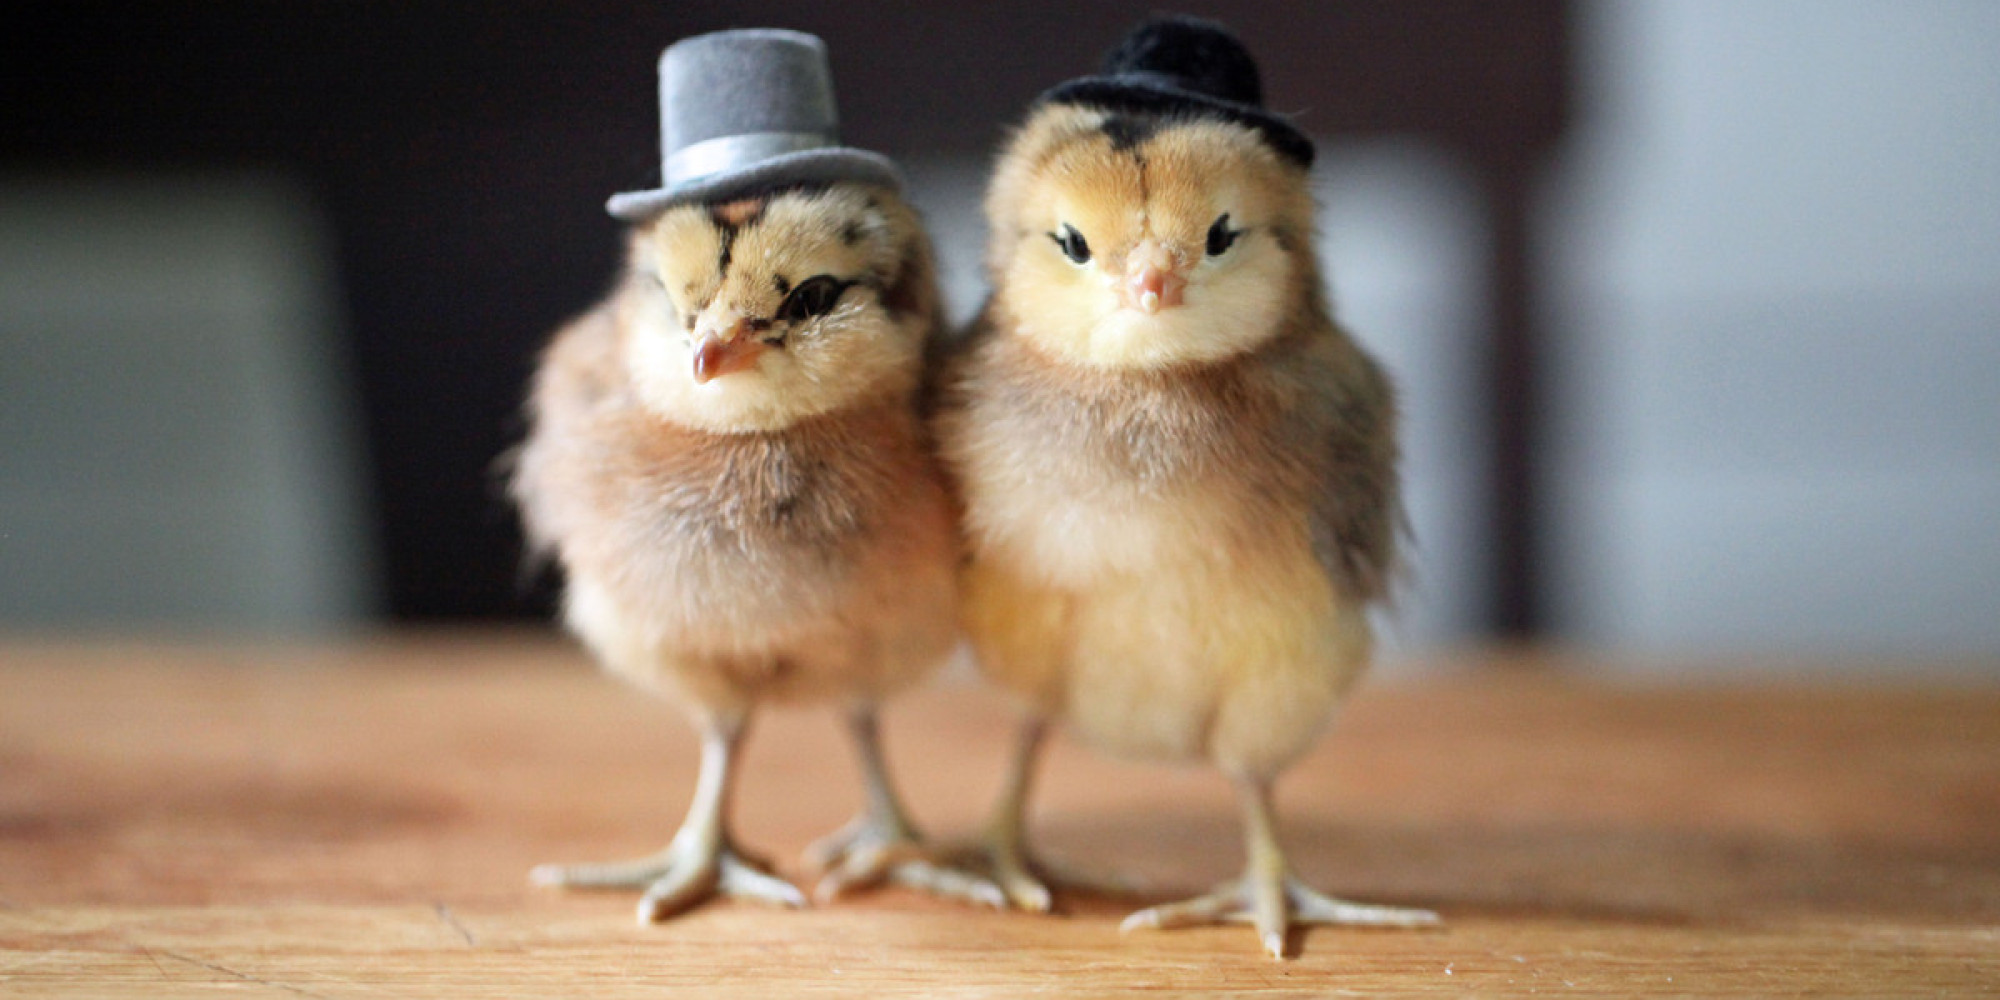 Little Baby Birds Flaunt Fancy Hats With The Utmost Sophistication ...